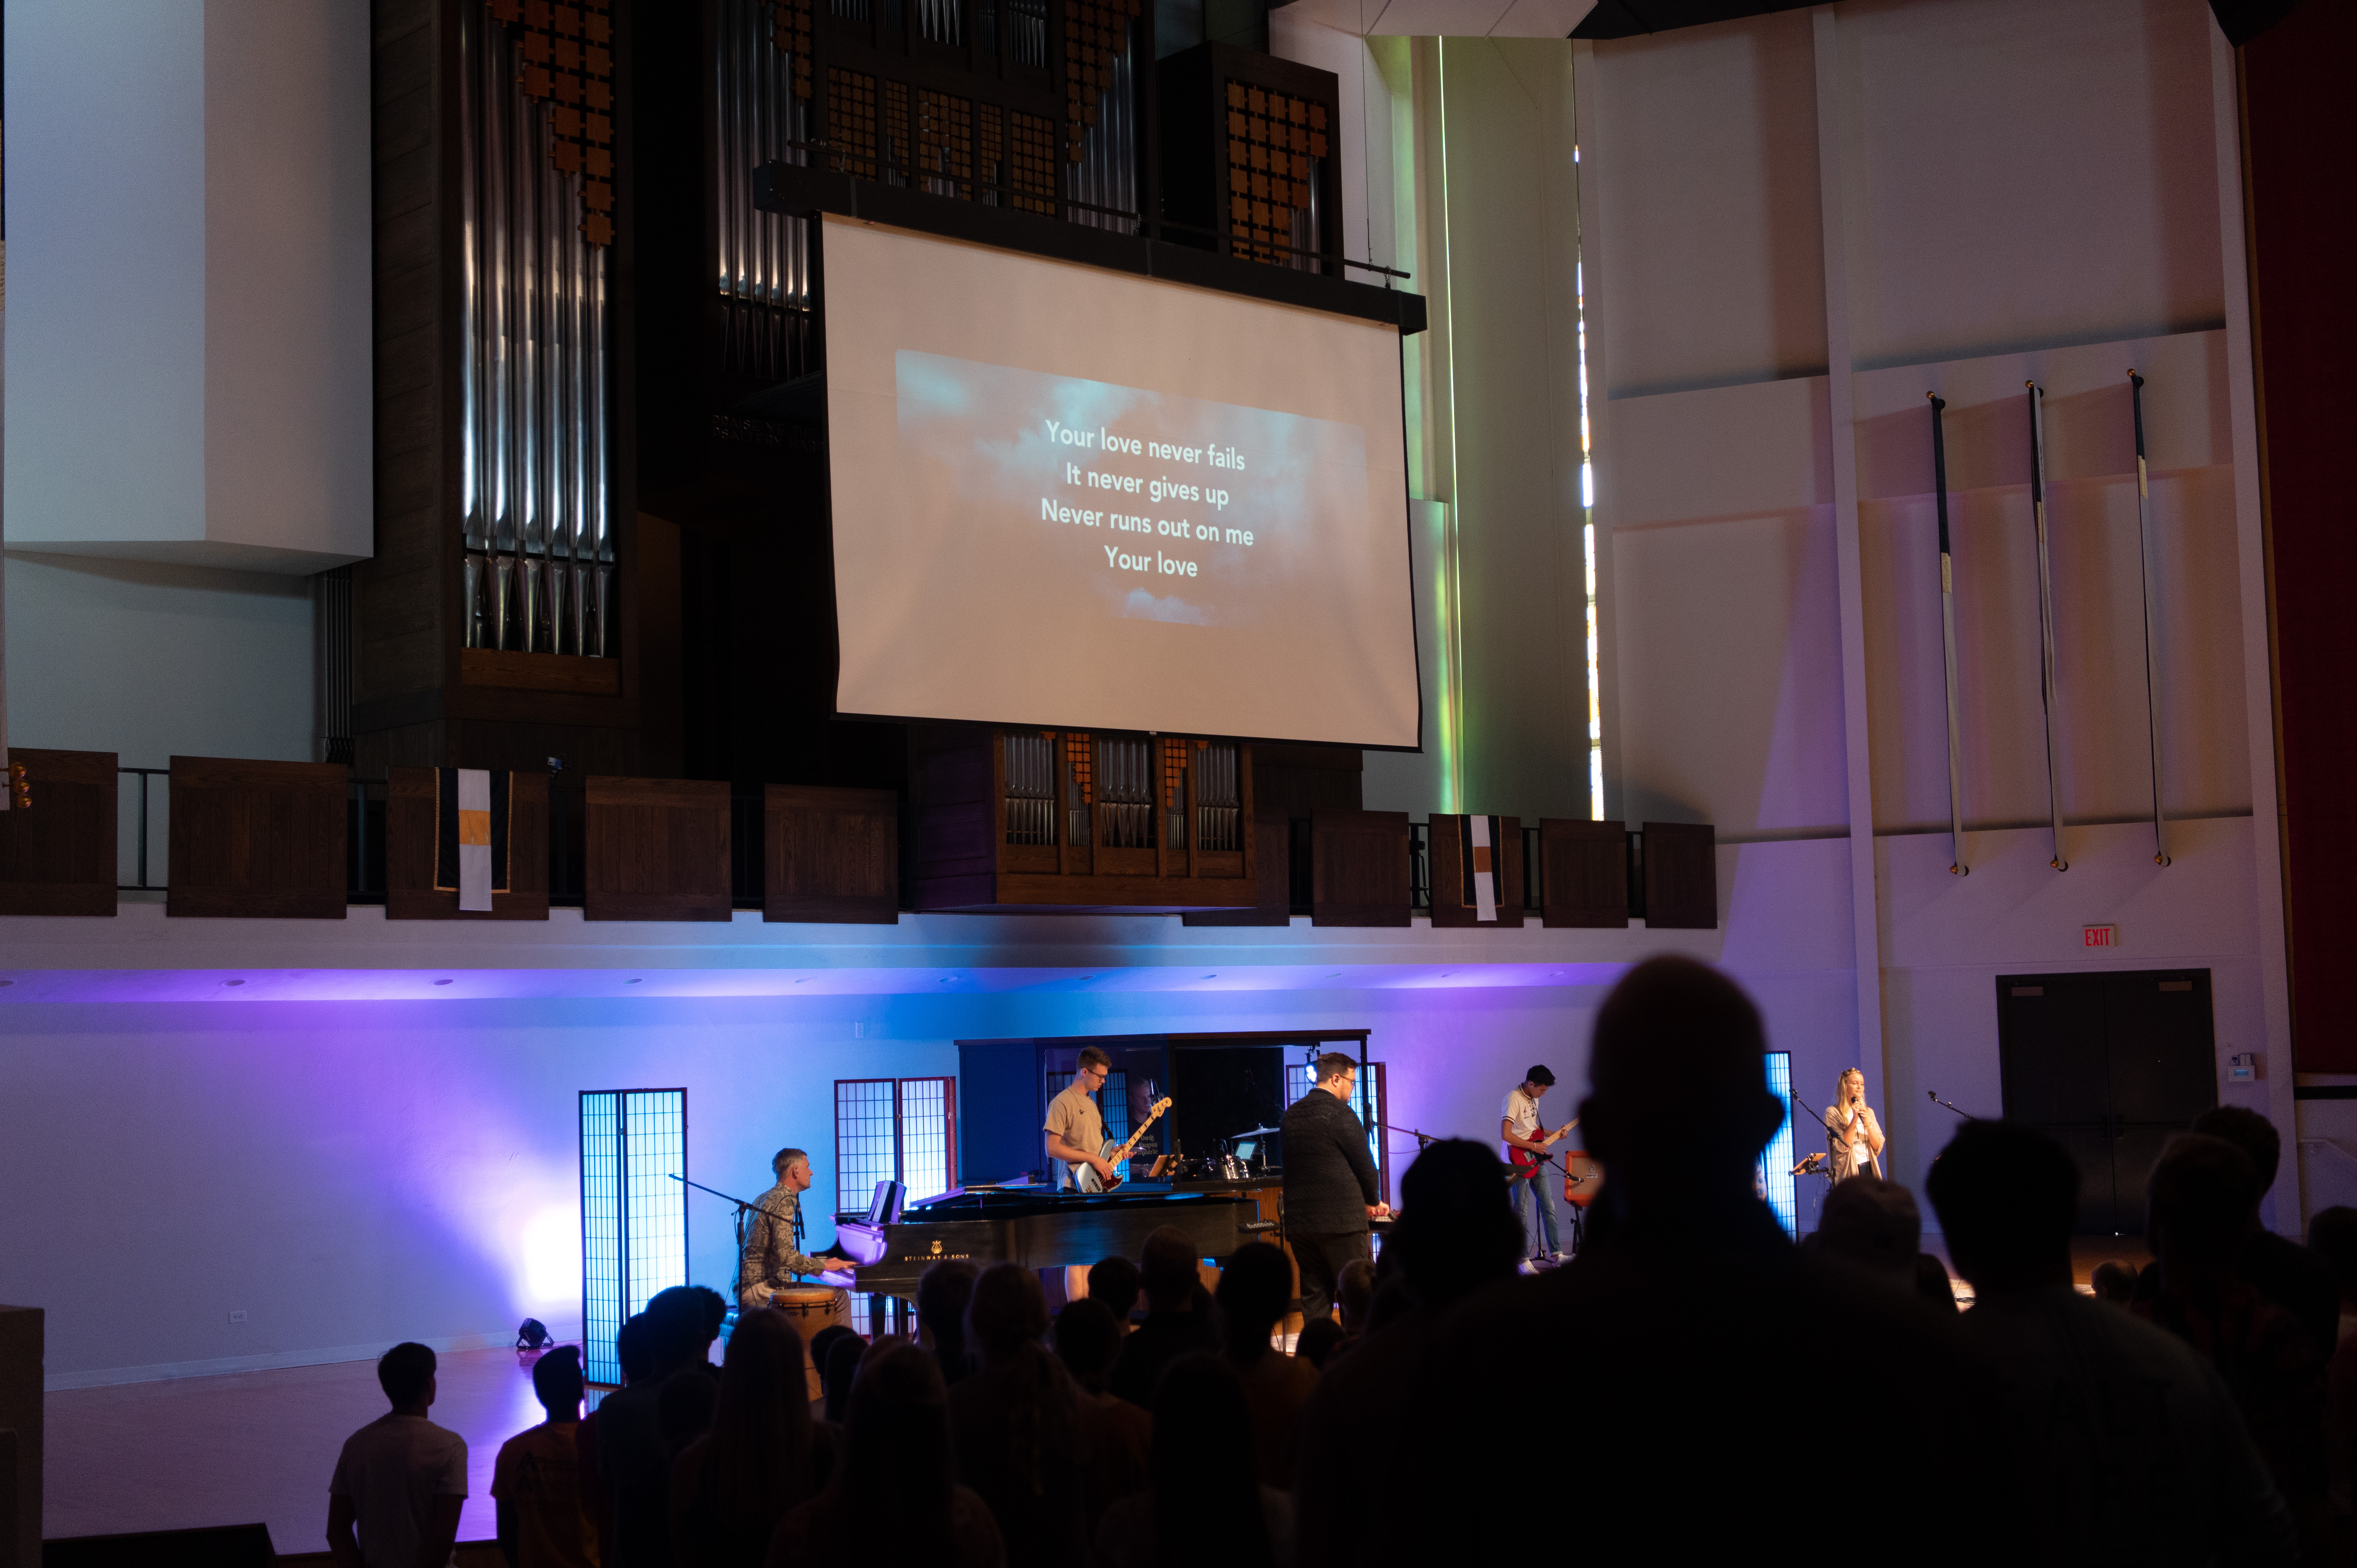 A group of performers leading worship at chapel